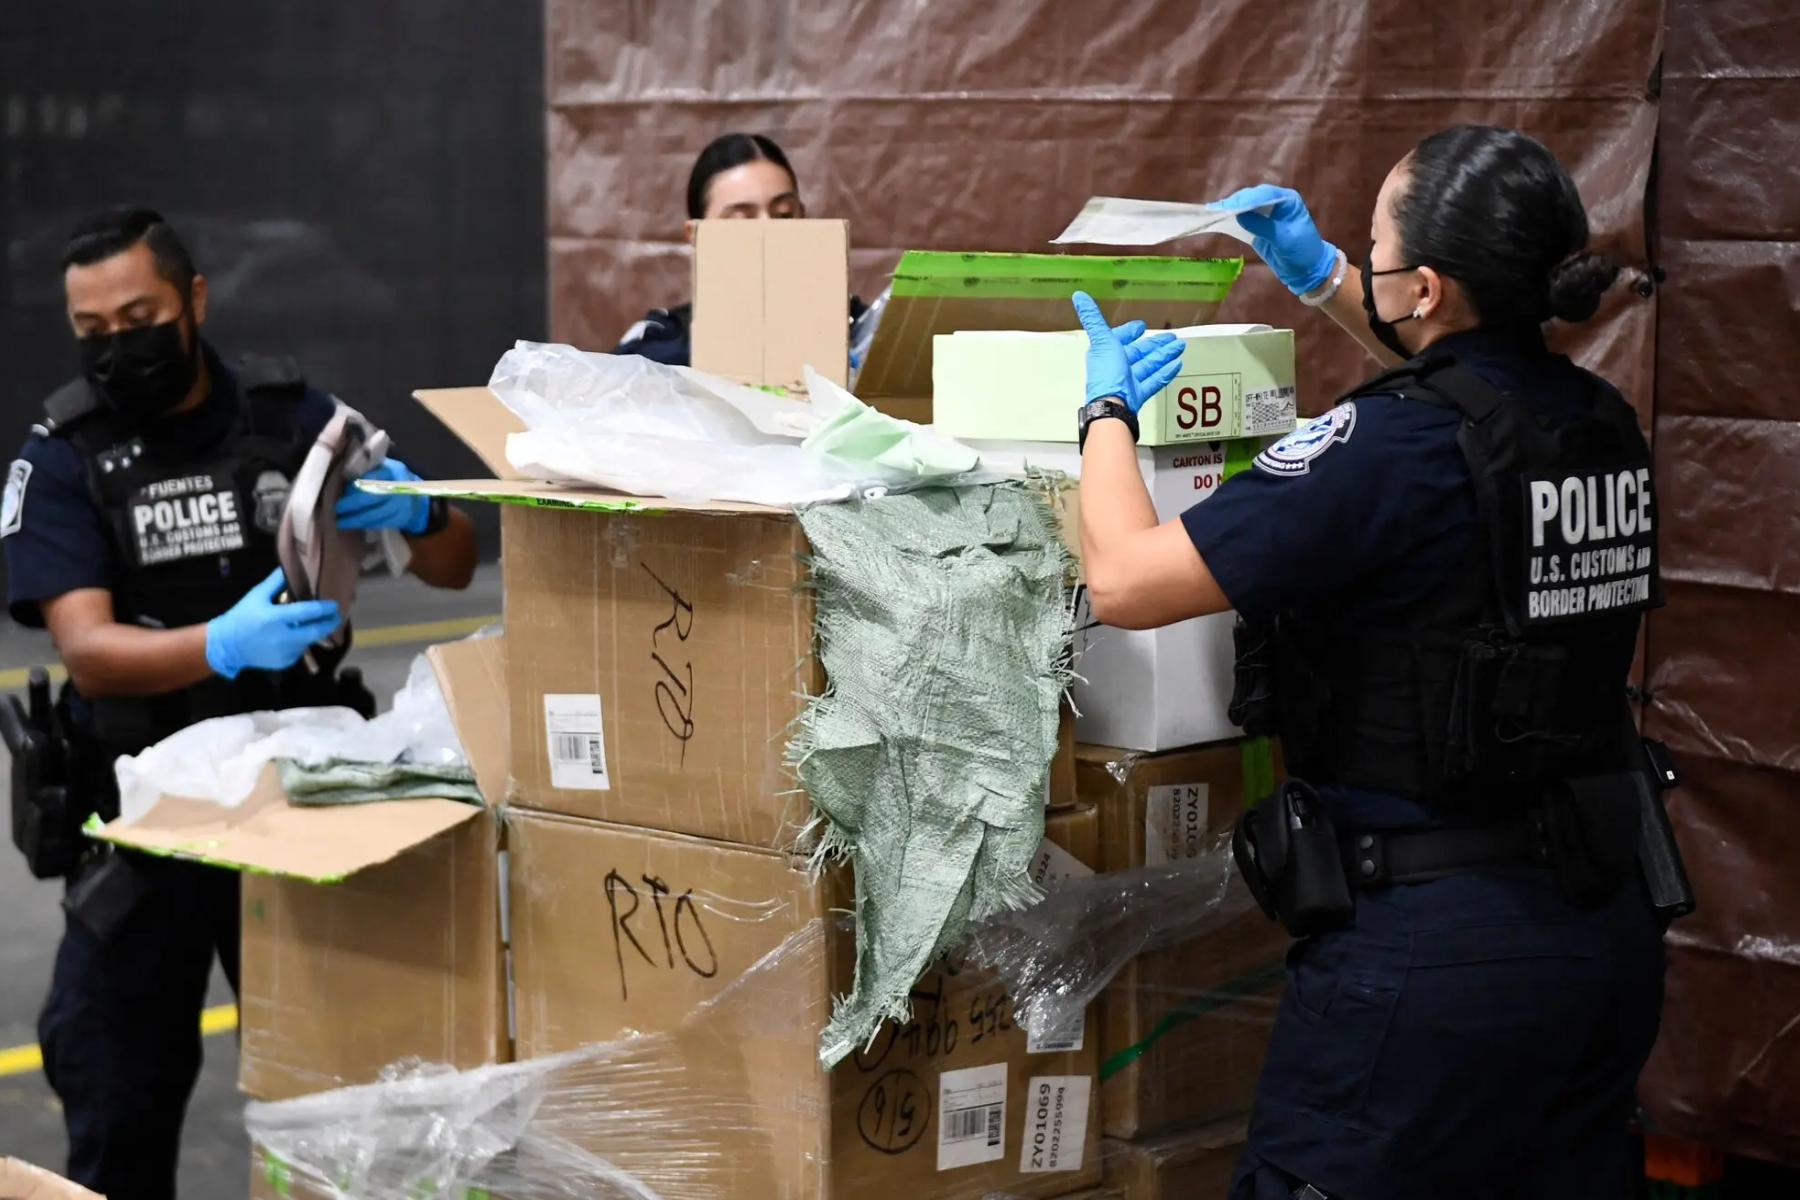 Officers from the United States Customs and Border Protection demonstrate a physical inspection of confiscated goods in Los Angeles